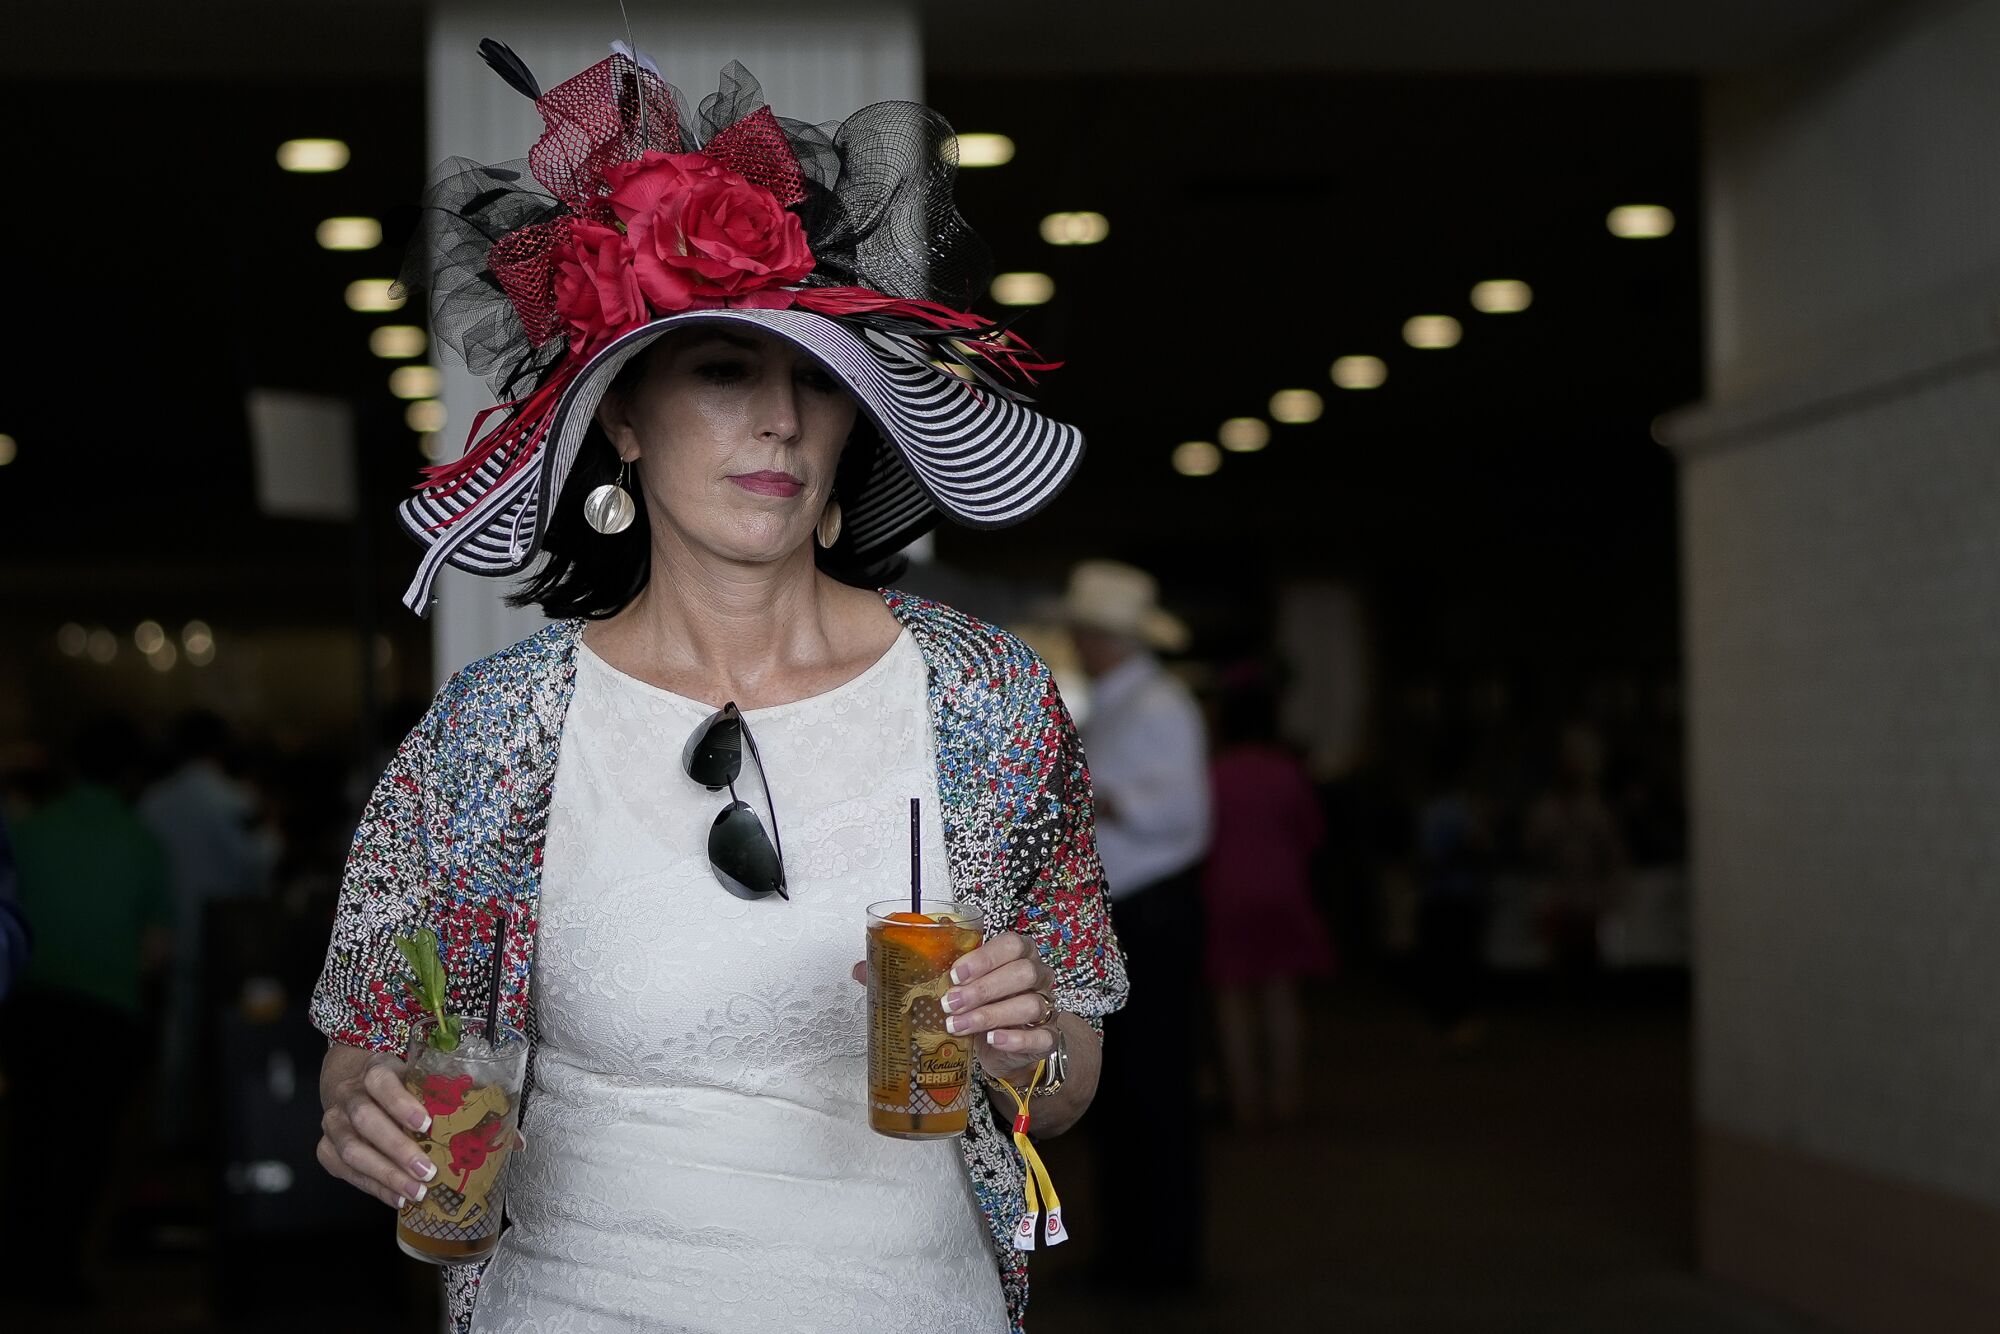 A woman wearing a red, white and black elaborate hat walks to her seat at Churchill Downs.